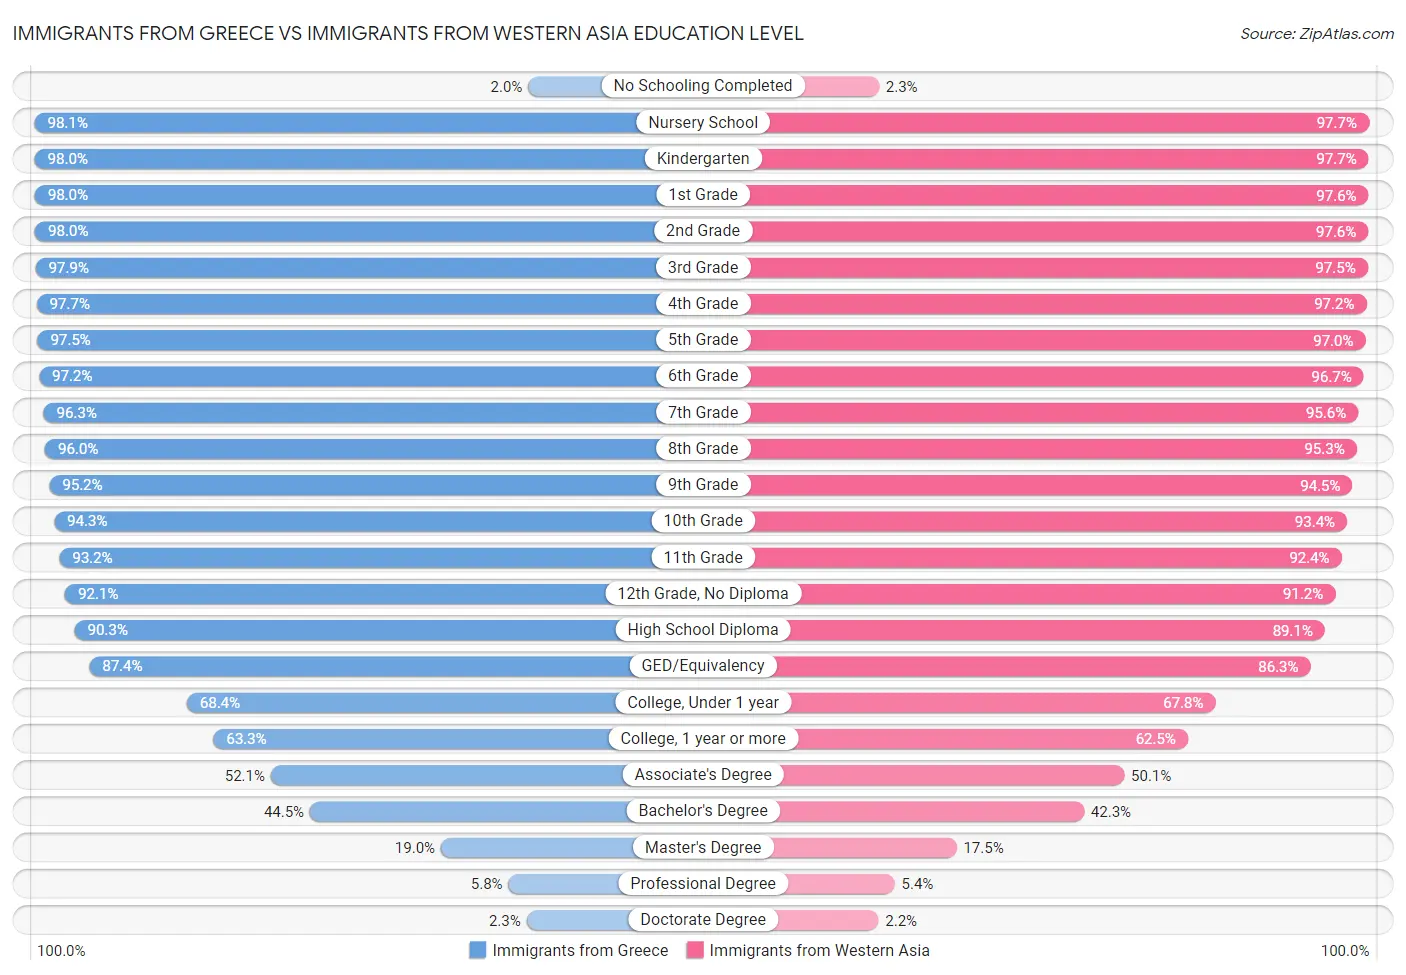 Immigrants from Greece vs Immigrants from Western Asia Education Level